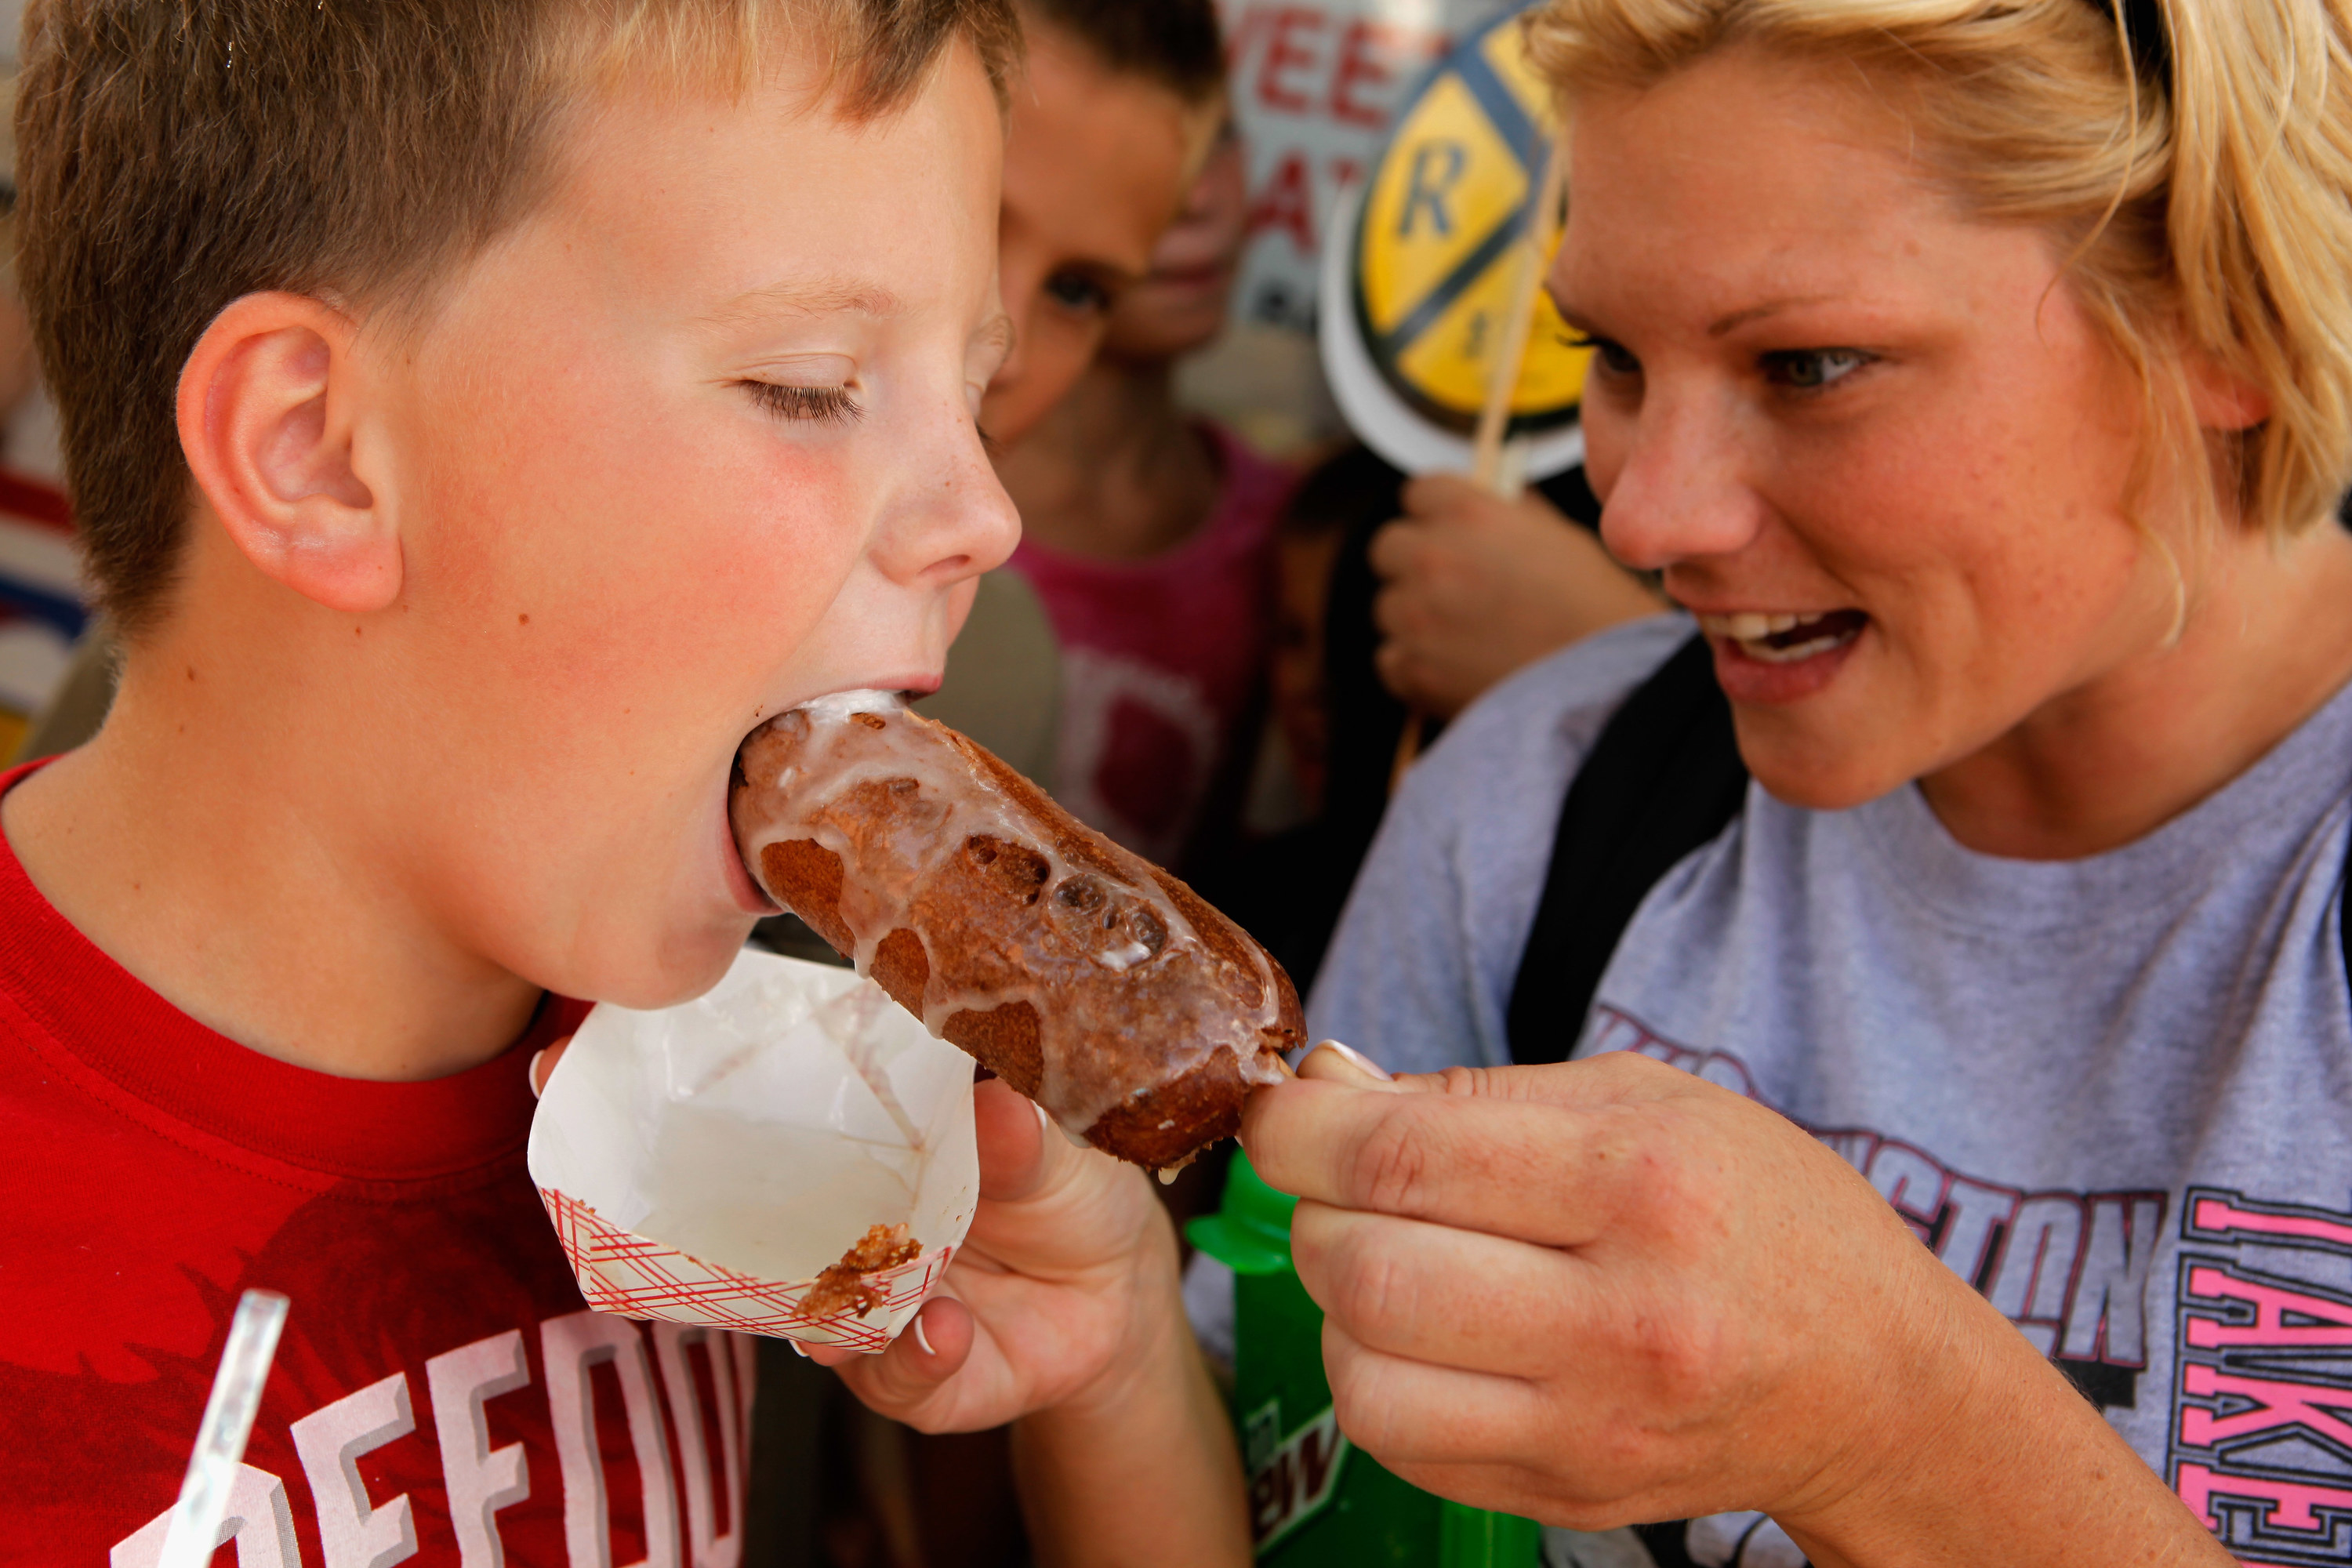 A woman feeds her son a food item at the Iowa State Fair